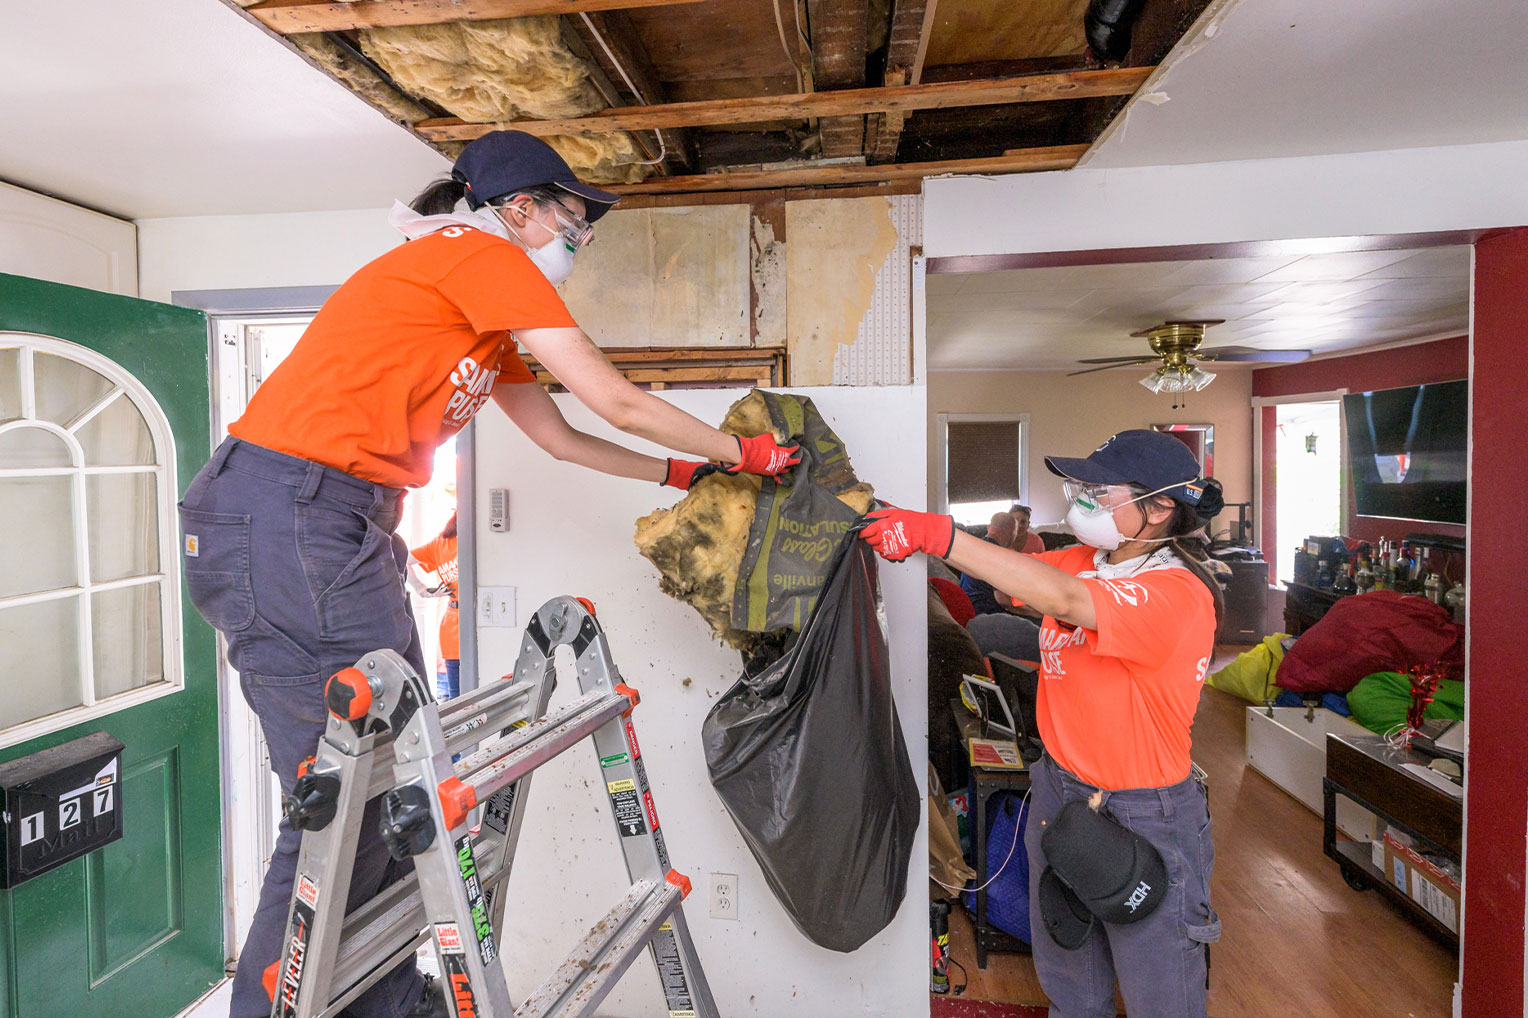 Samaritan's Purse volunteers remove soiled insulation from Jason's ceiling, damaged by the nine inches of rain they received.